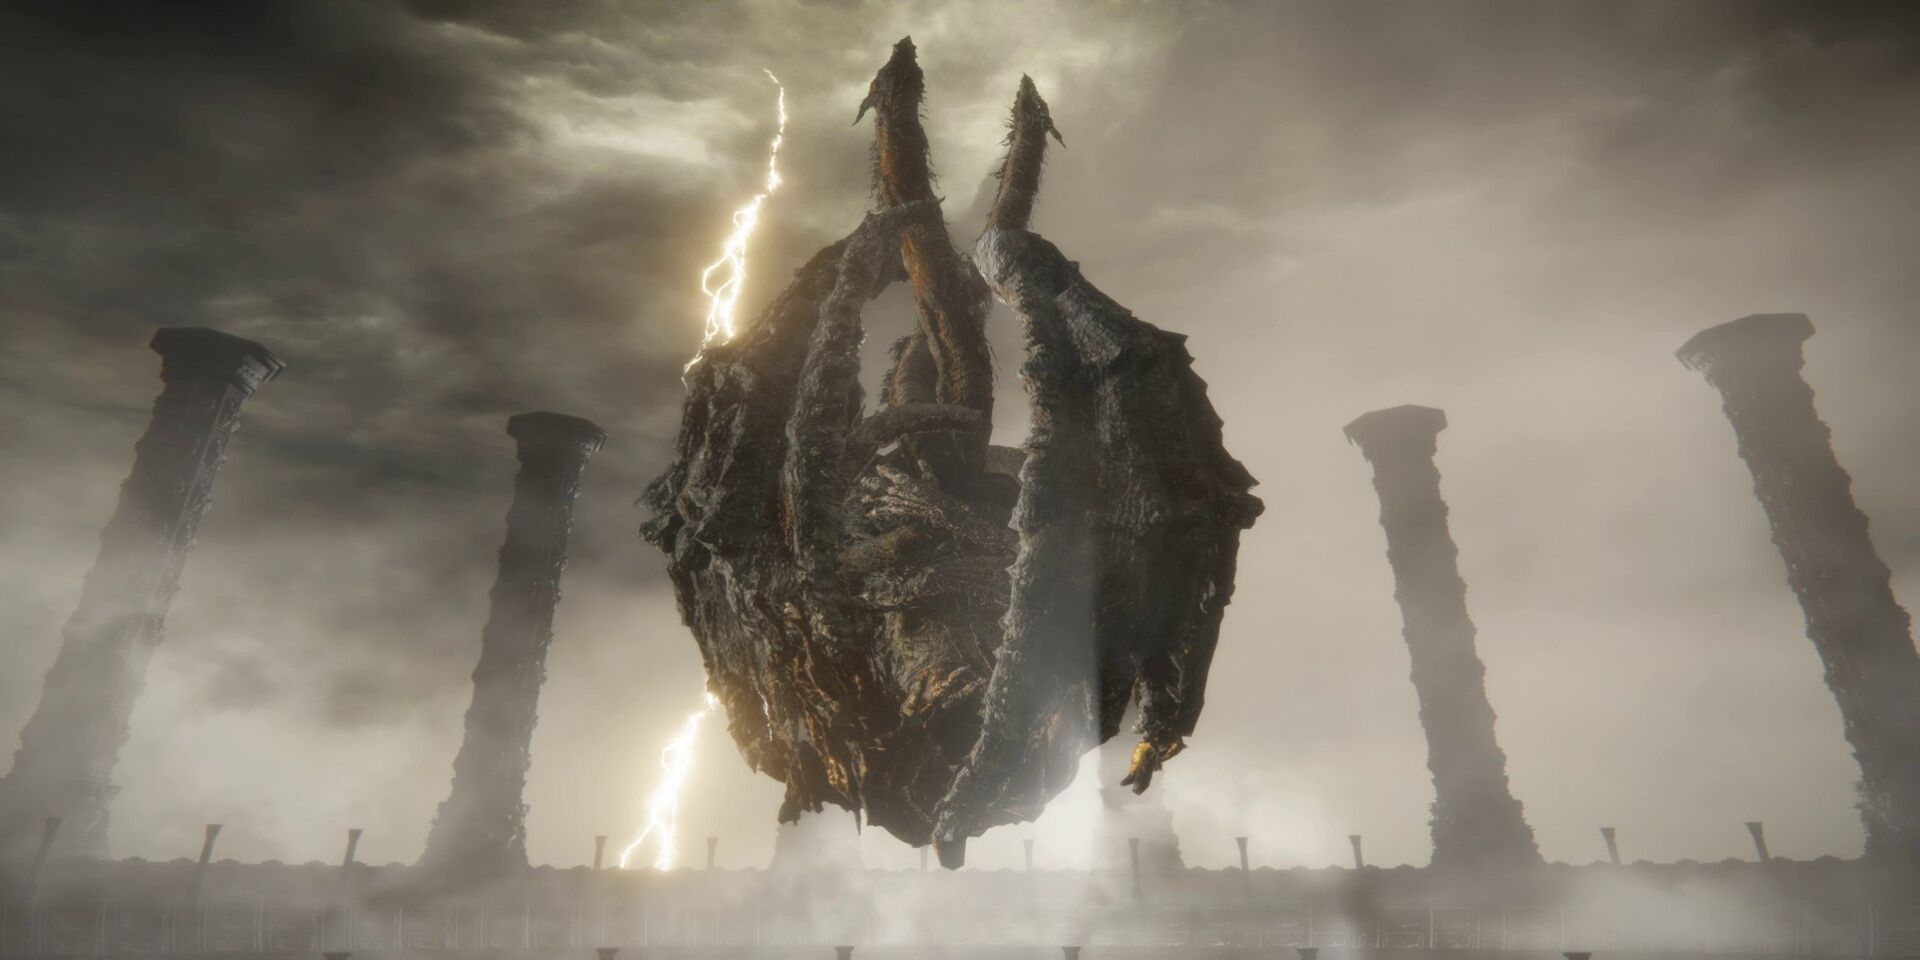 Elden Ring's secret boss Dragonlord Placidusax. It is represented by a curled up dragon in the form of a floating ball. The arena has tall pillars and there is smoke that makes the location quite blurry. There is also lightning falling from the sky, beyond the arena's limits.